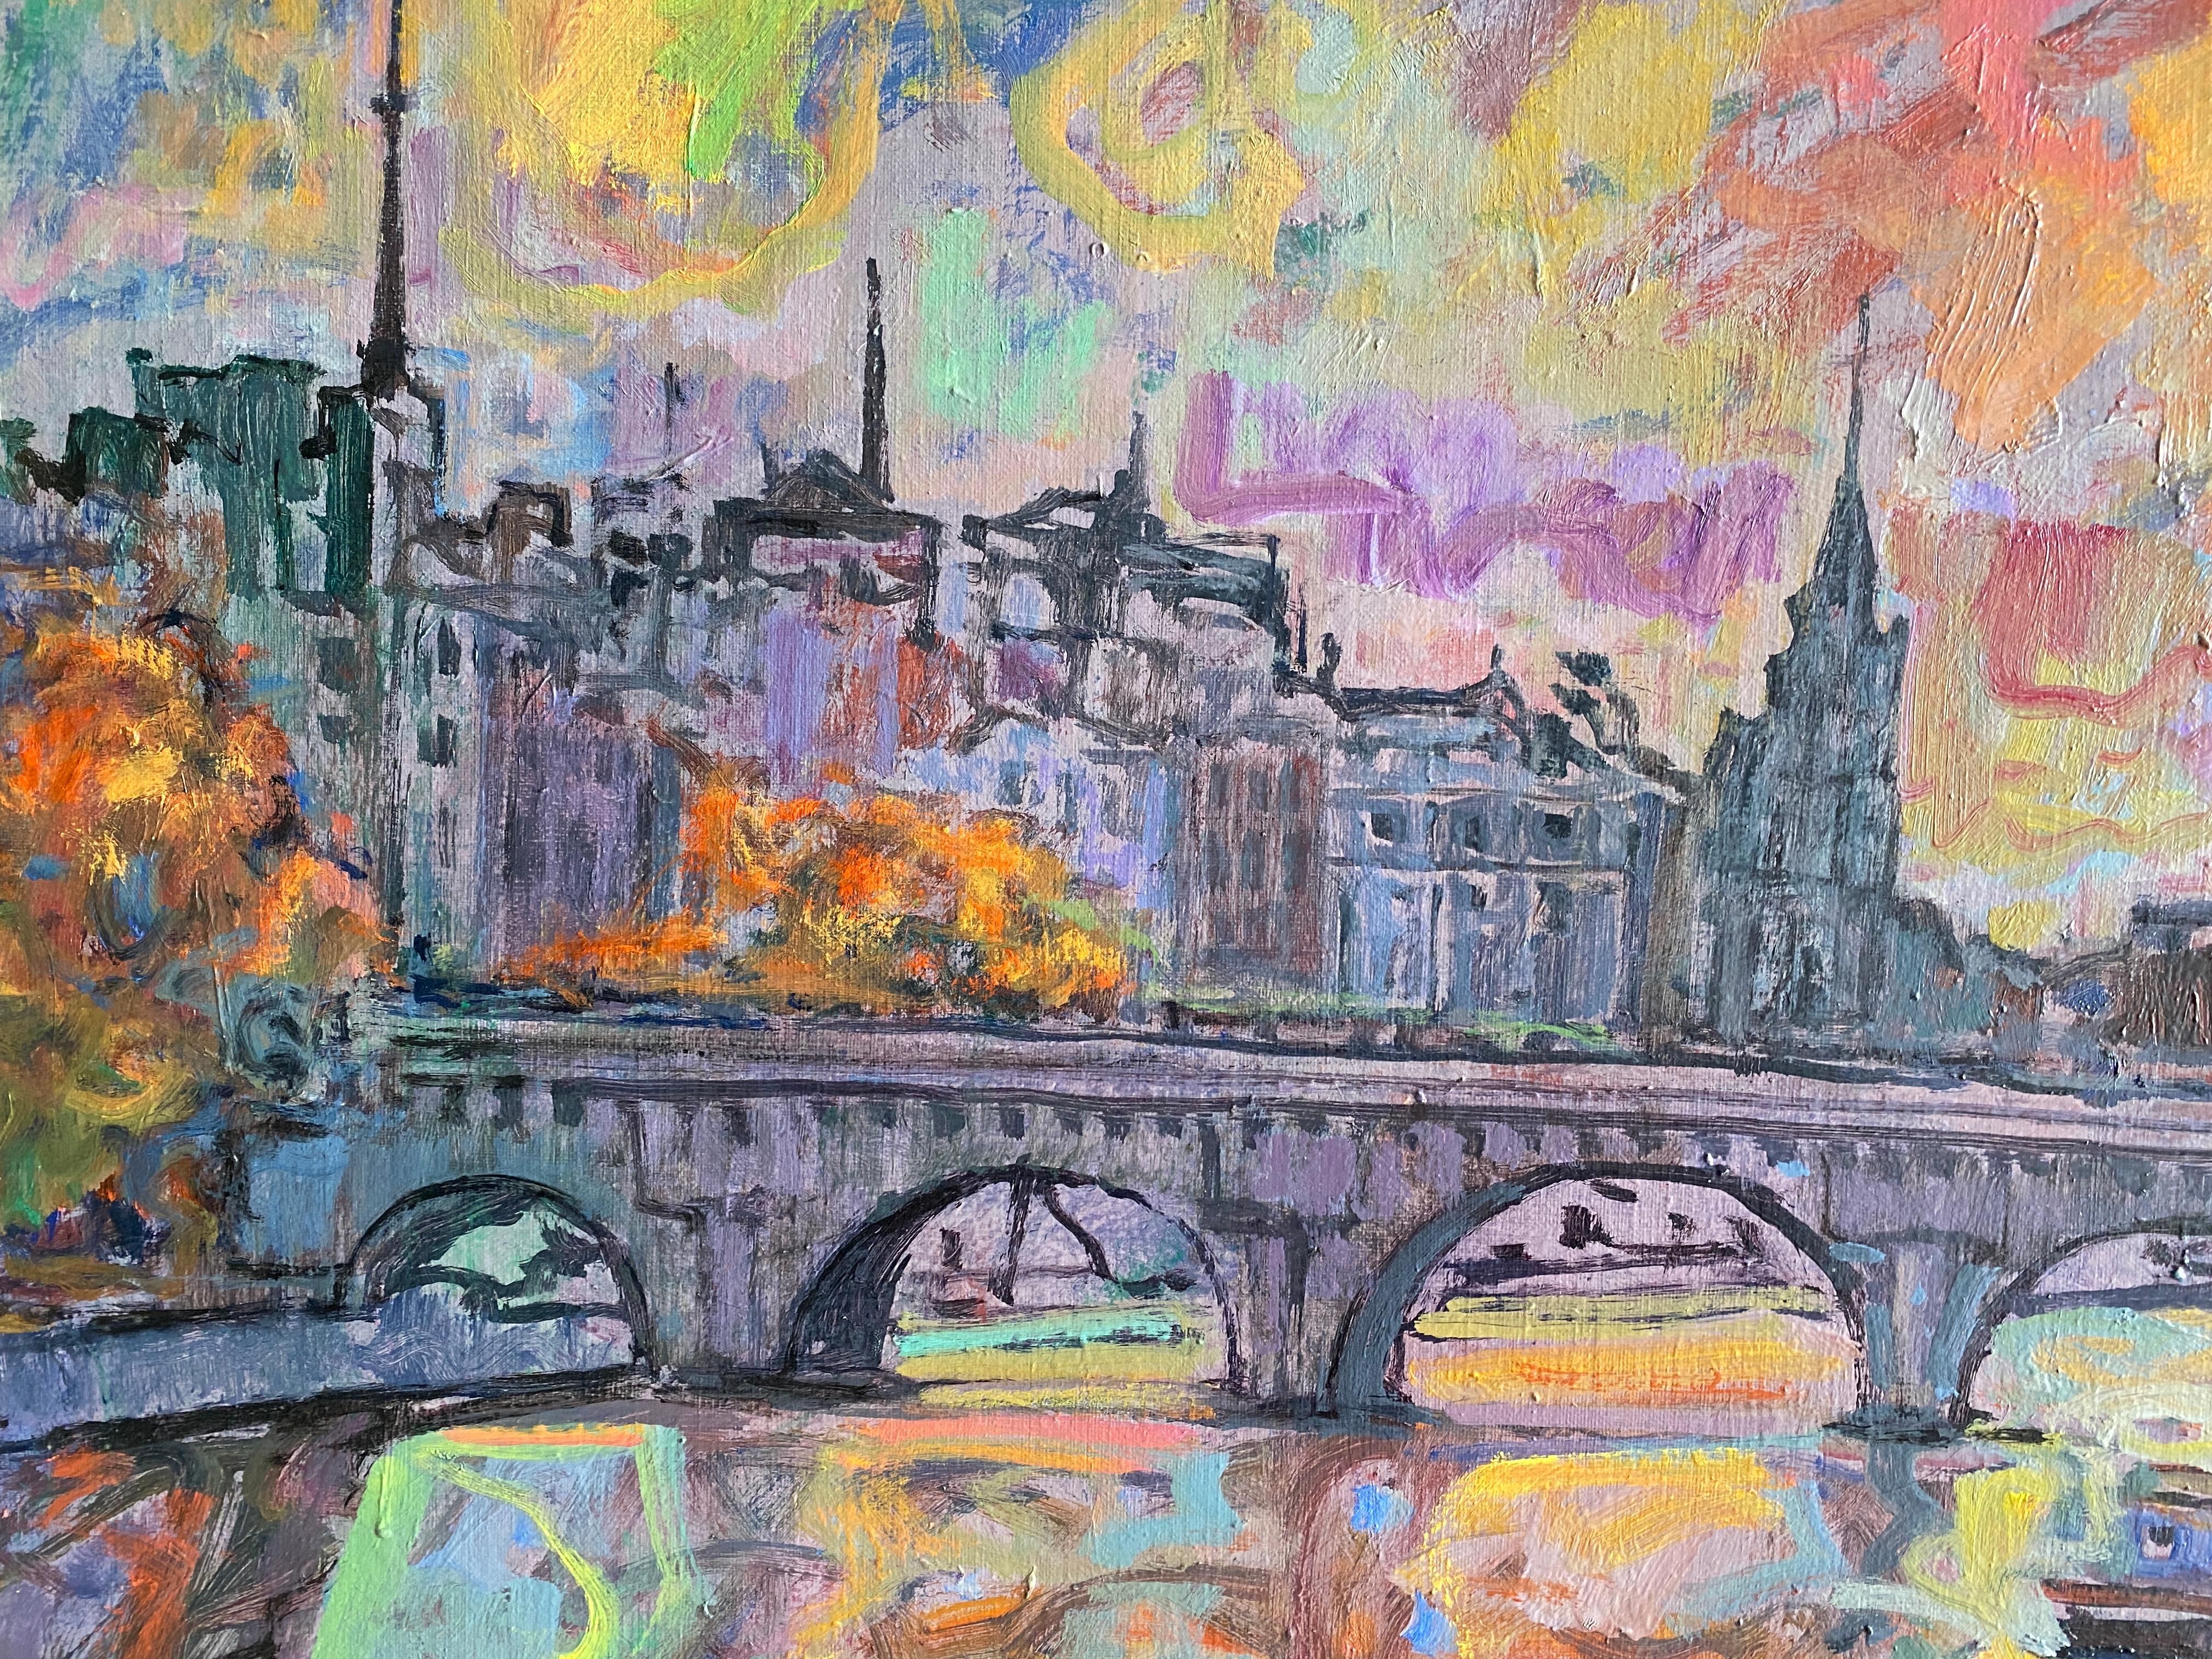 Le Pont Neuf - Paris.   
Oil on canvas by Spanish artist Joan Raset.
Dimension with frame 84 cm H x 104 cm W x 4 cm D
Dimension without frame 73 cm H x 92 cm W x 2 cm D

Beautiful Parisian view with a spectacular light.
In the foreground the waters